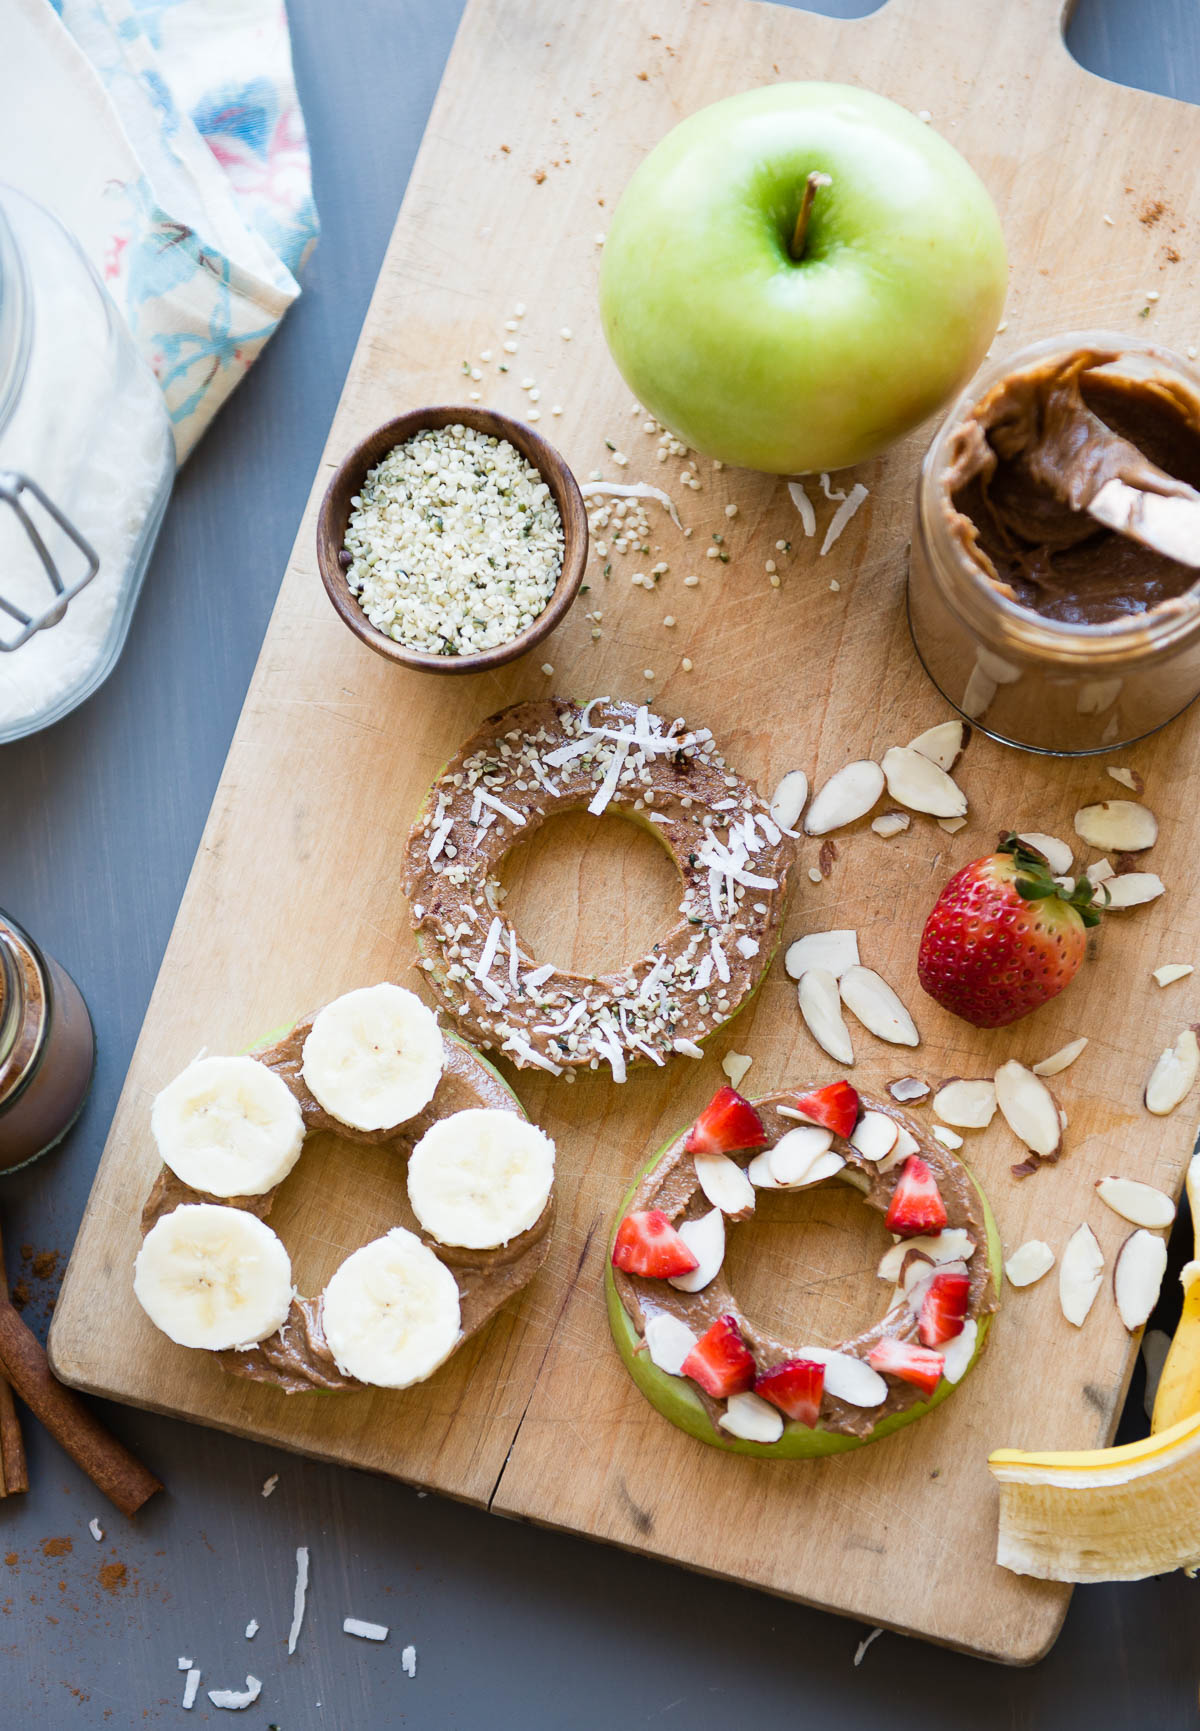 apples cut into donut shapes and topped with nut butter and a variety of toppings like coconut flakes, bananas and strawberries.